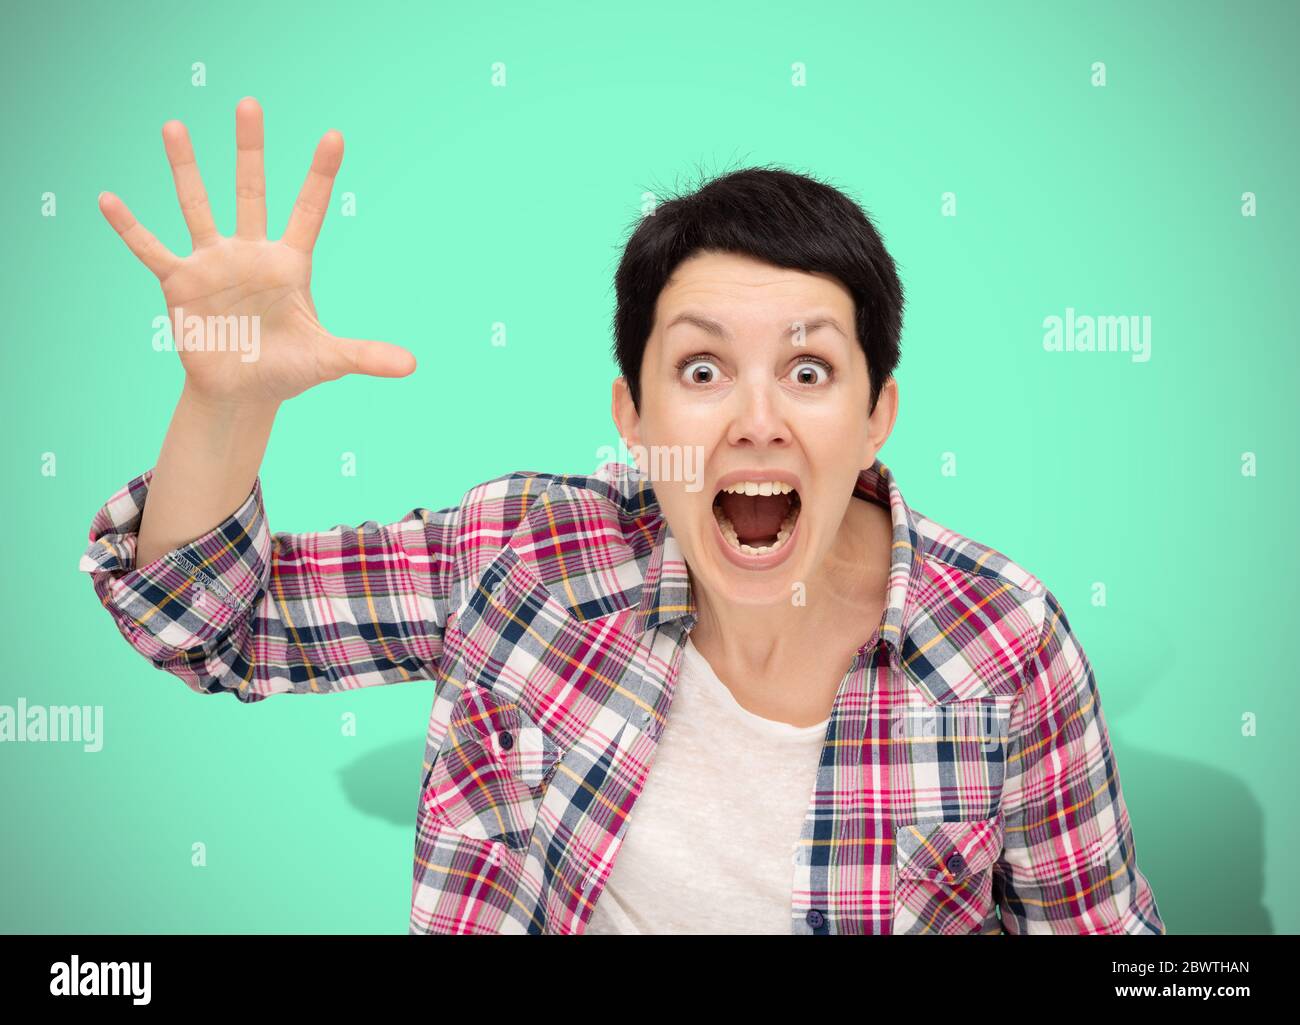 Angry woman isolated on neo mint background. Beautiful furious short haired brunette dressed casual plaid shirt shouting and waving her palm hand Stock Photo